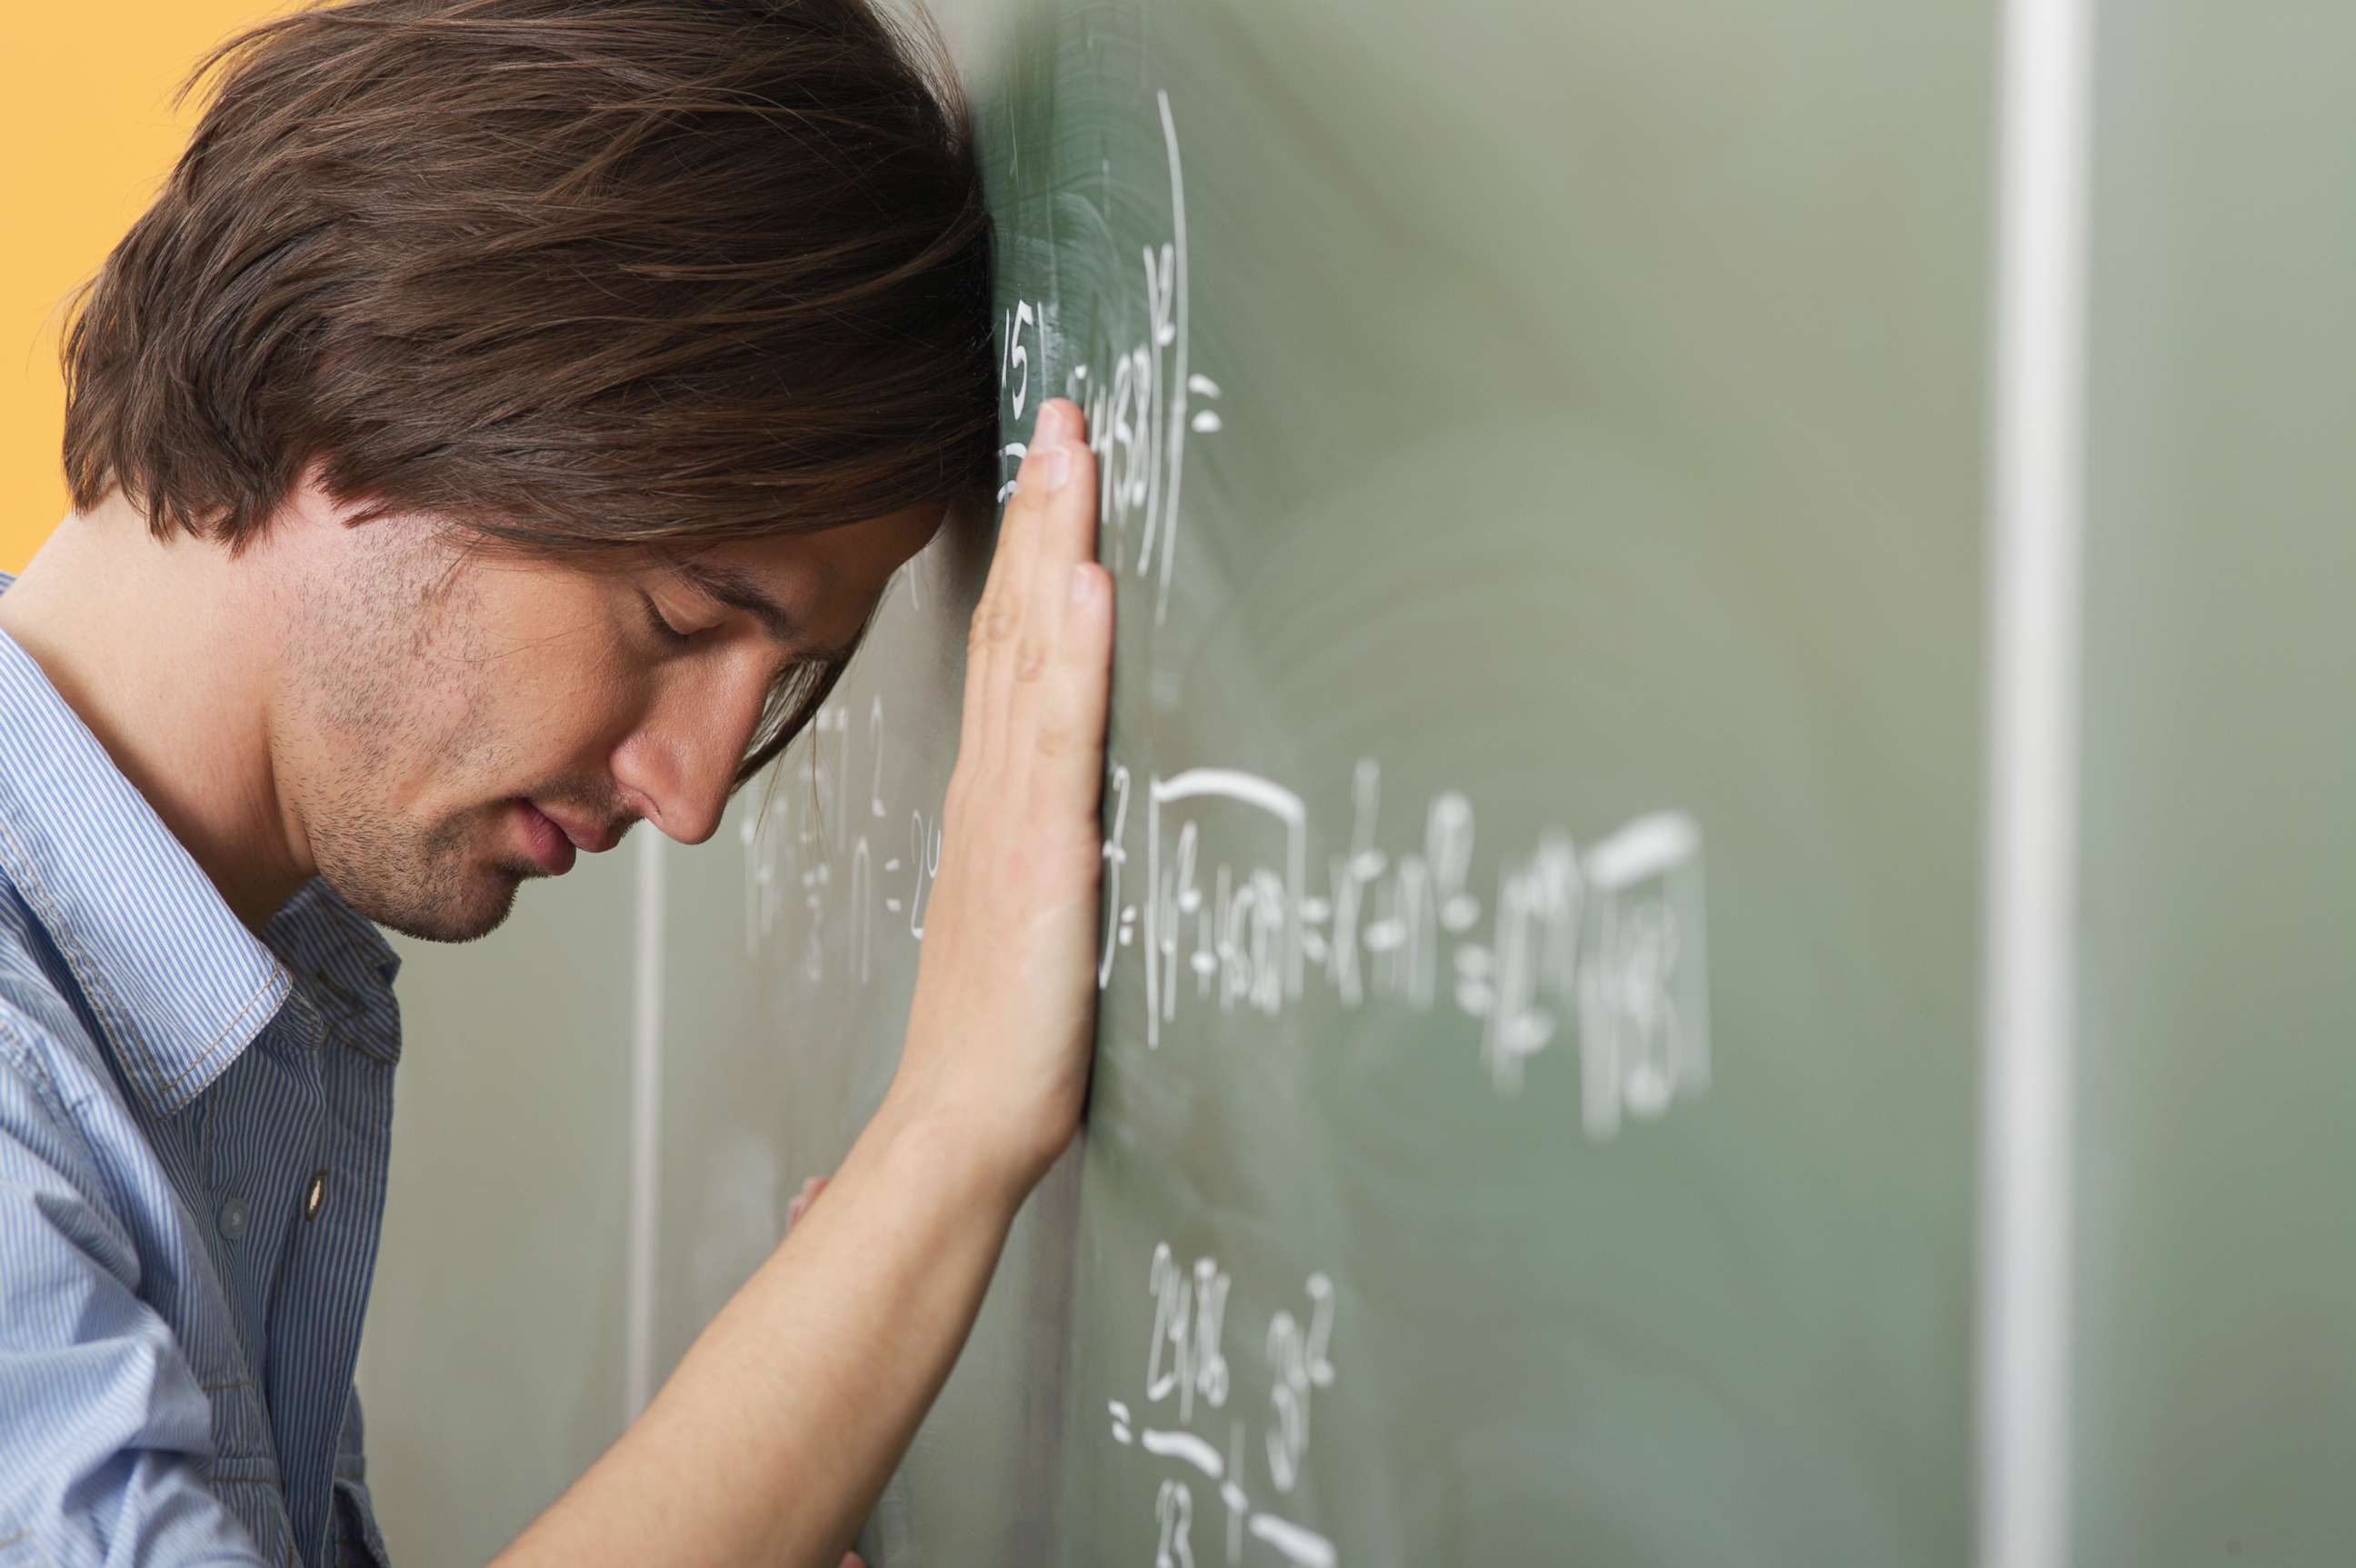 PHOTO: A college student is pictured leaning his head against a blackboard in this undated stock photo